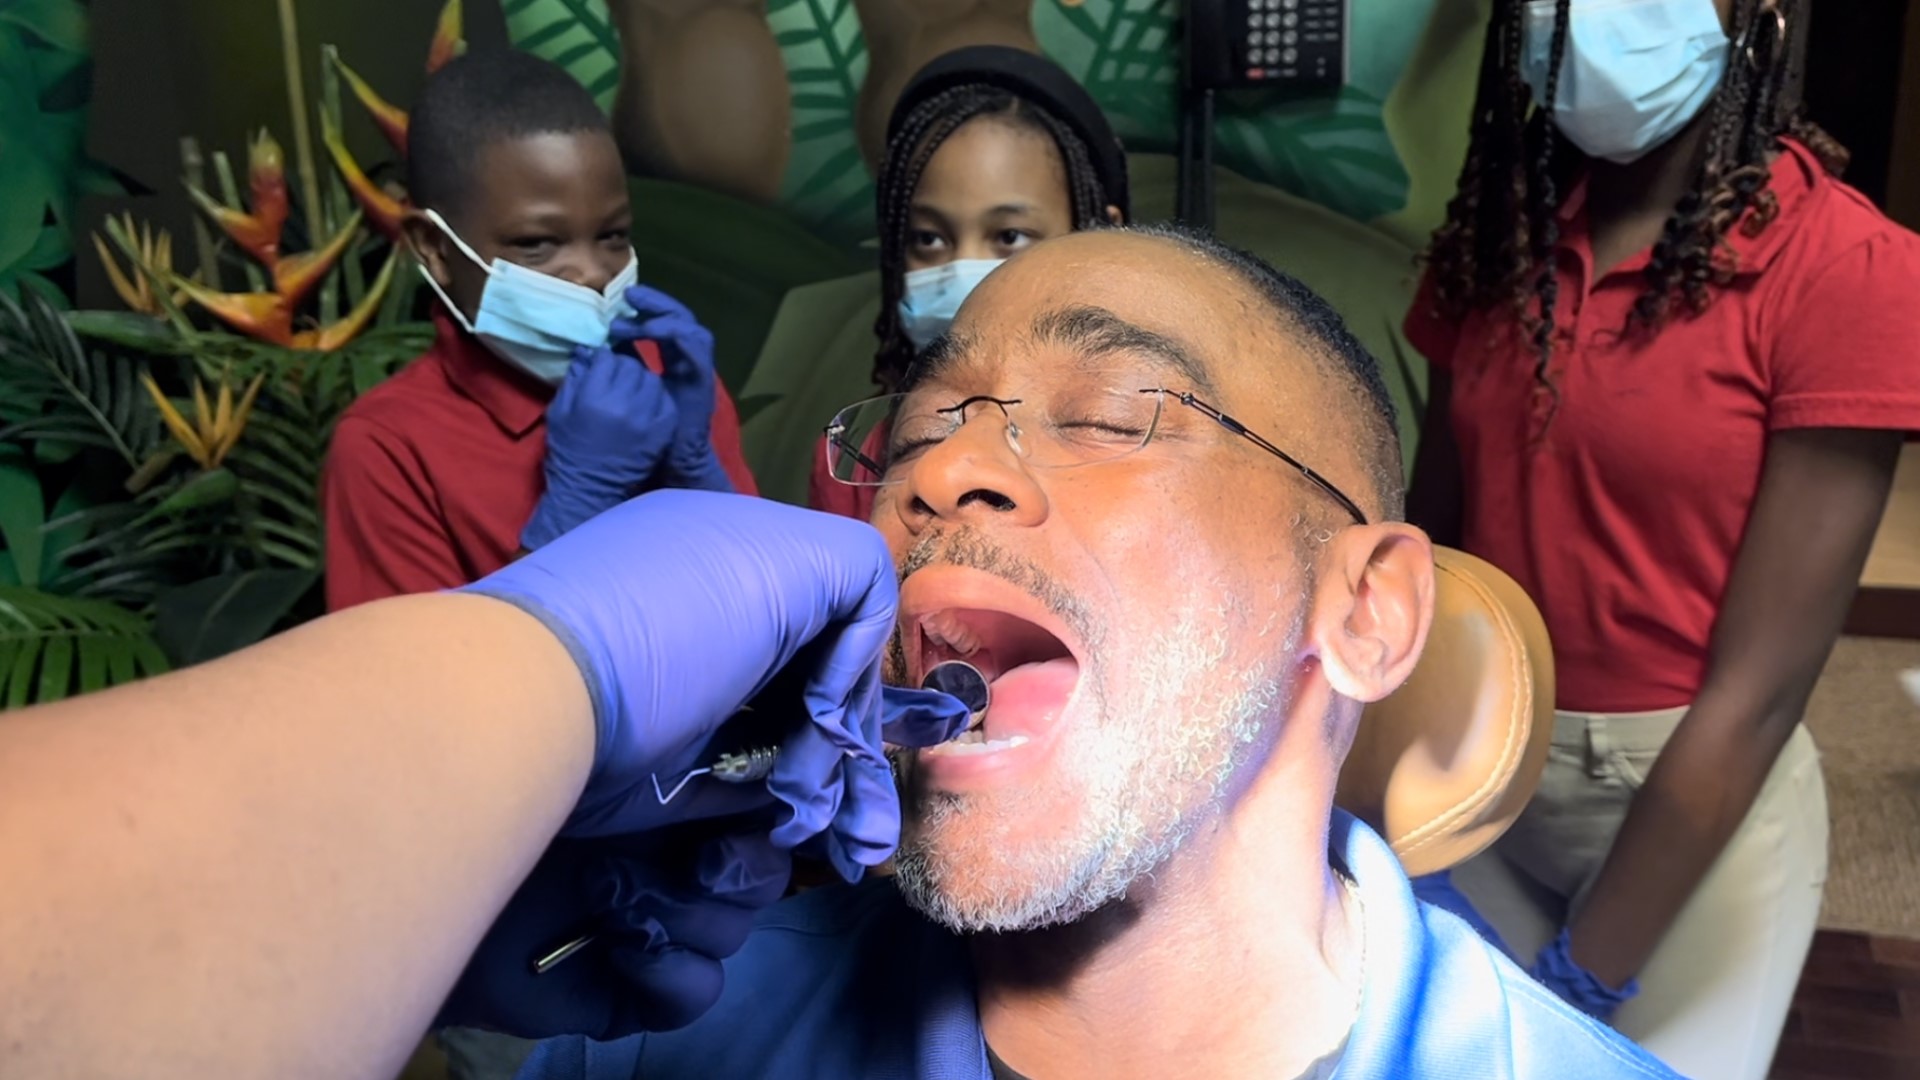 Kids got to handle tools and overcome their fears of the dentist's office.